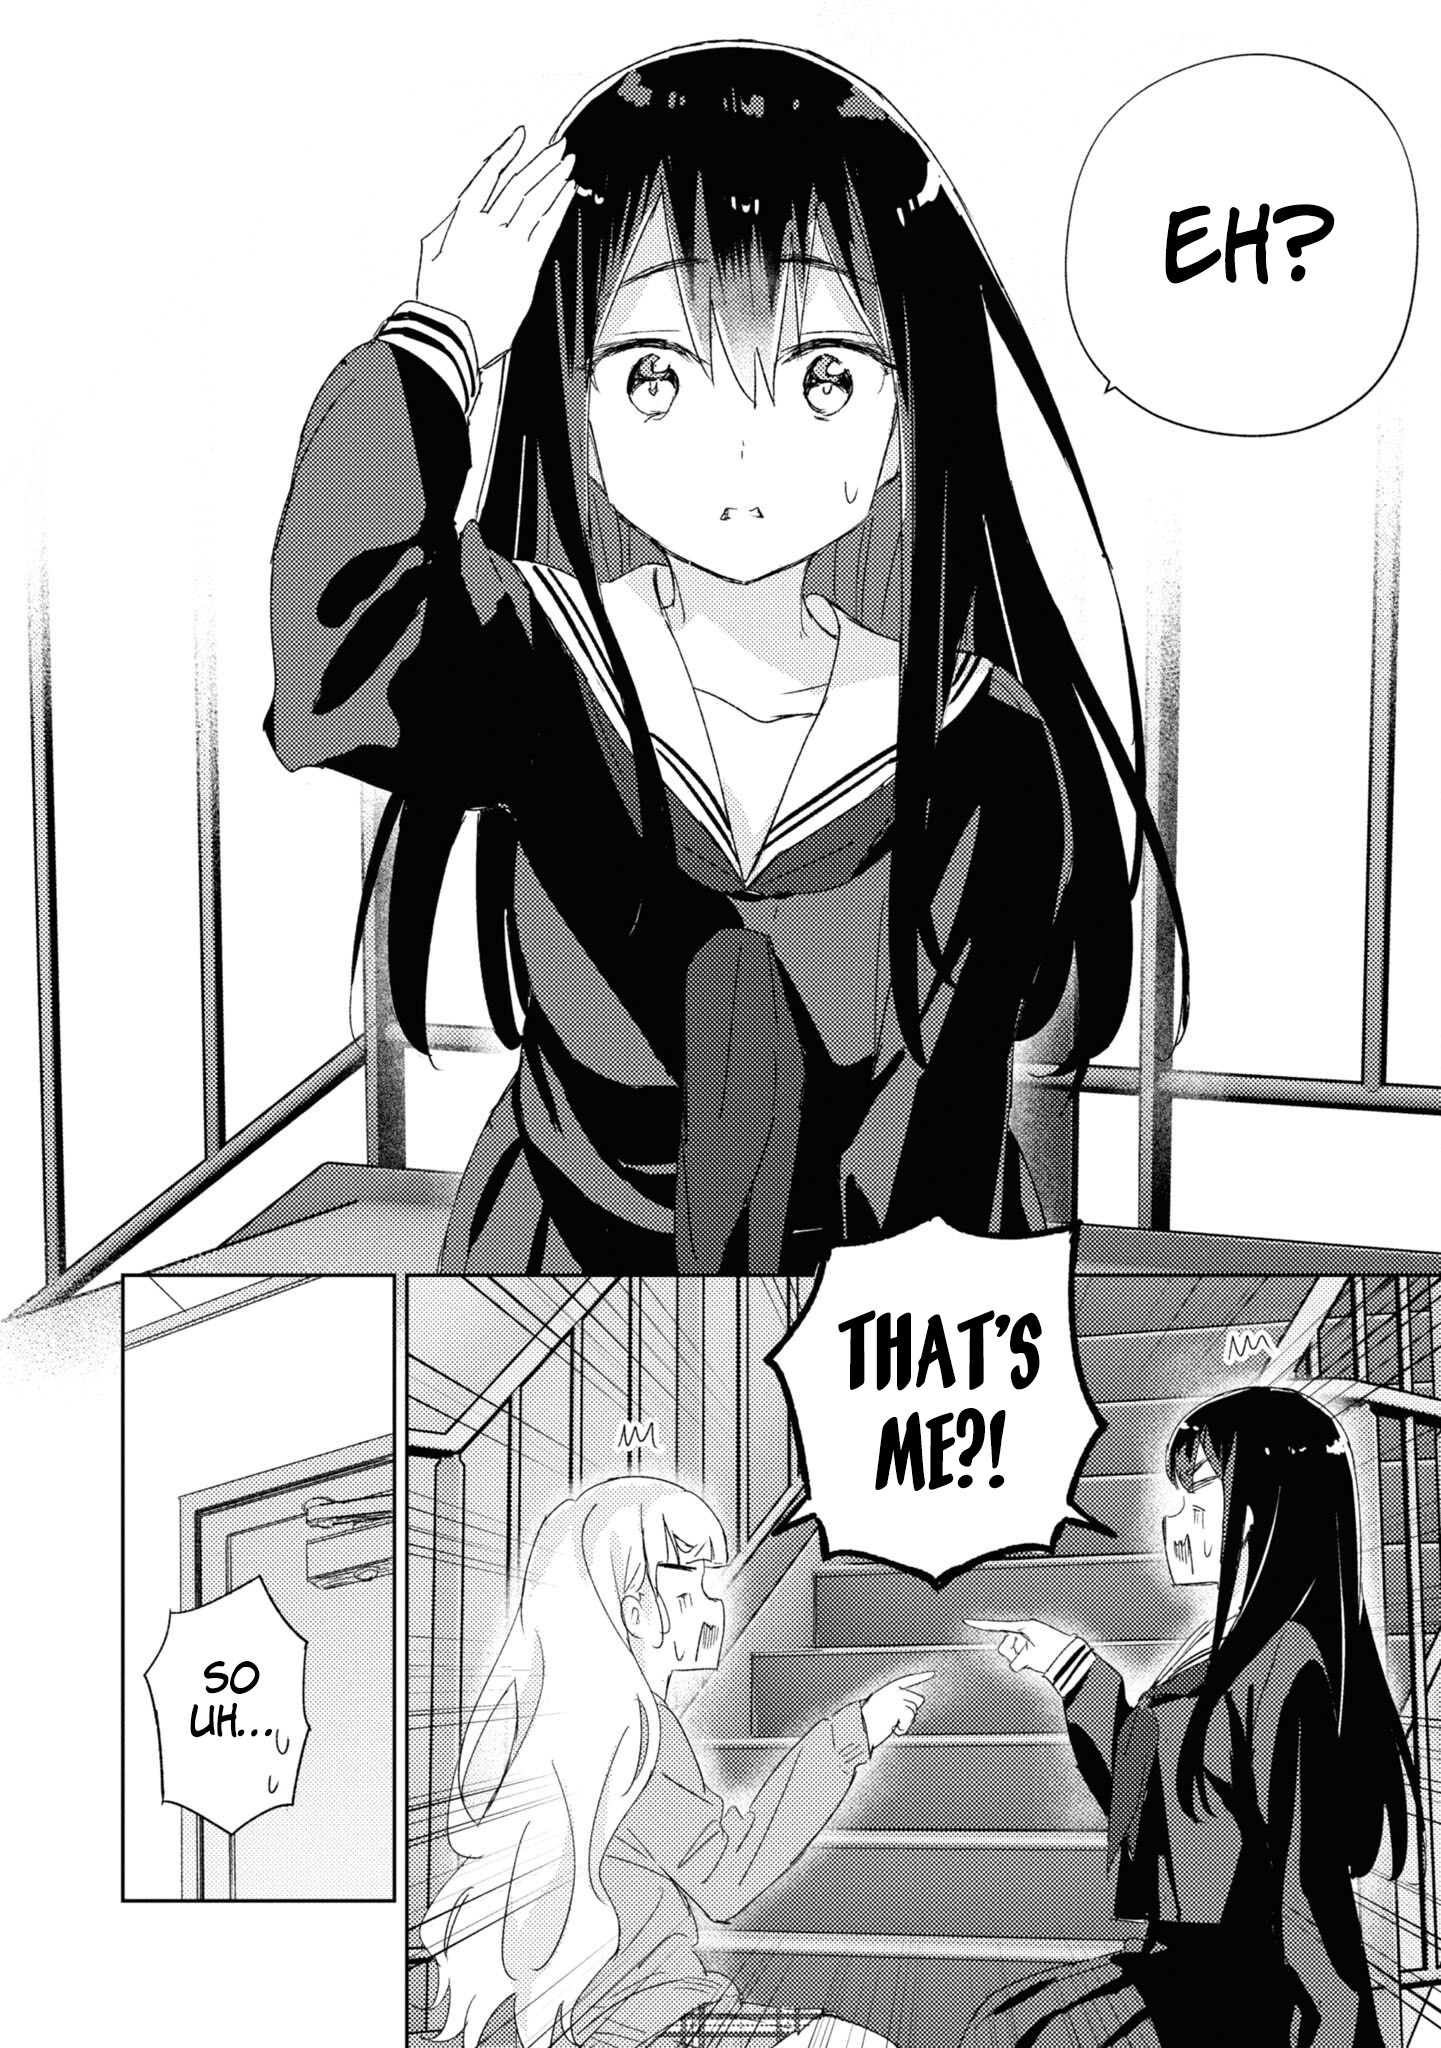 Yuri Is My Job! Official Comic Anthology Vol.1 Chapter 8: My Yuri Is Body Swap - Tsuke - Picture 2